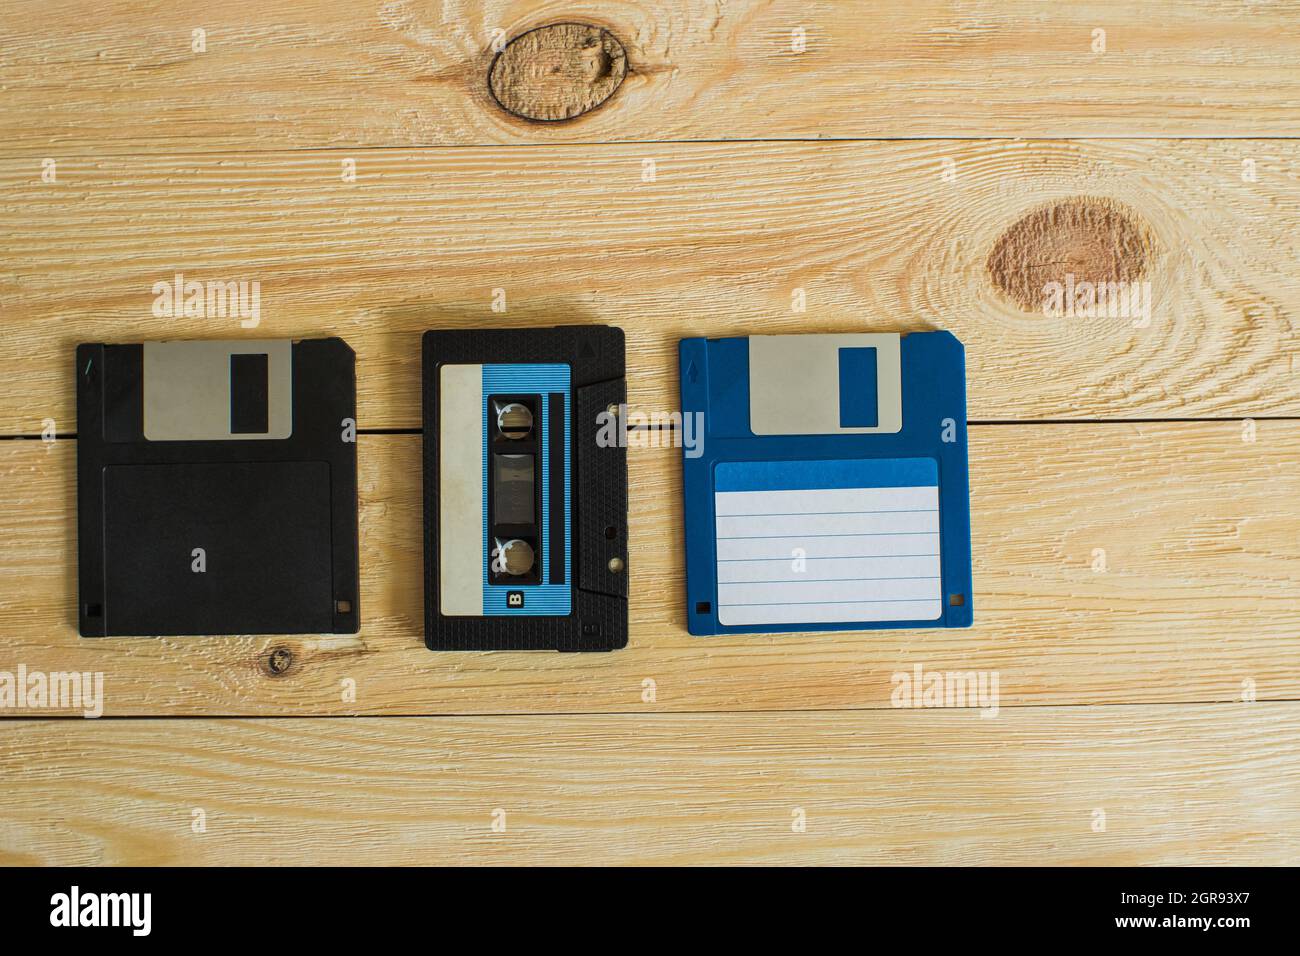 On A Wooden Background With Knots Is An Audio Cassette And Two Floppy Disks Stock Photo